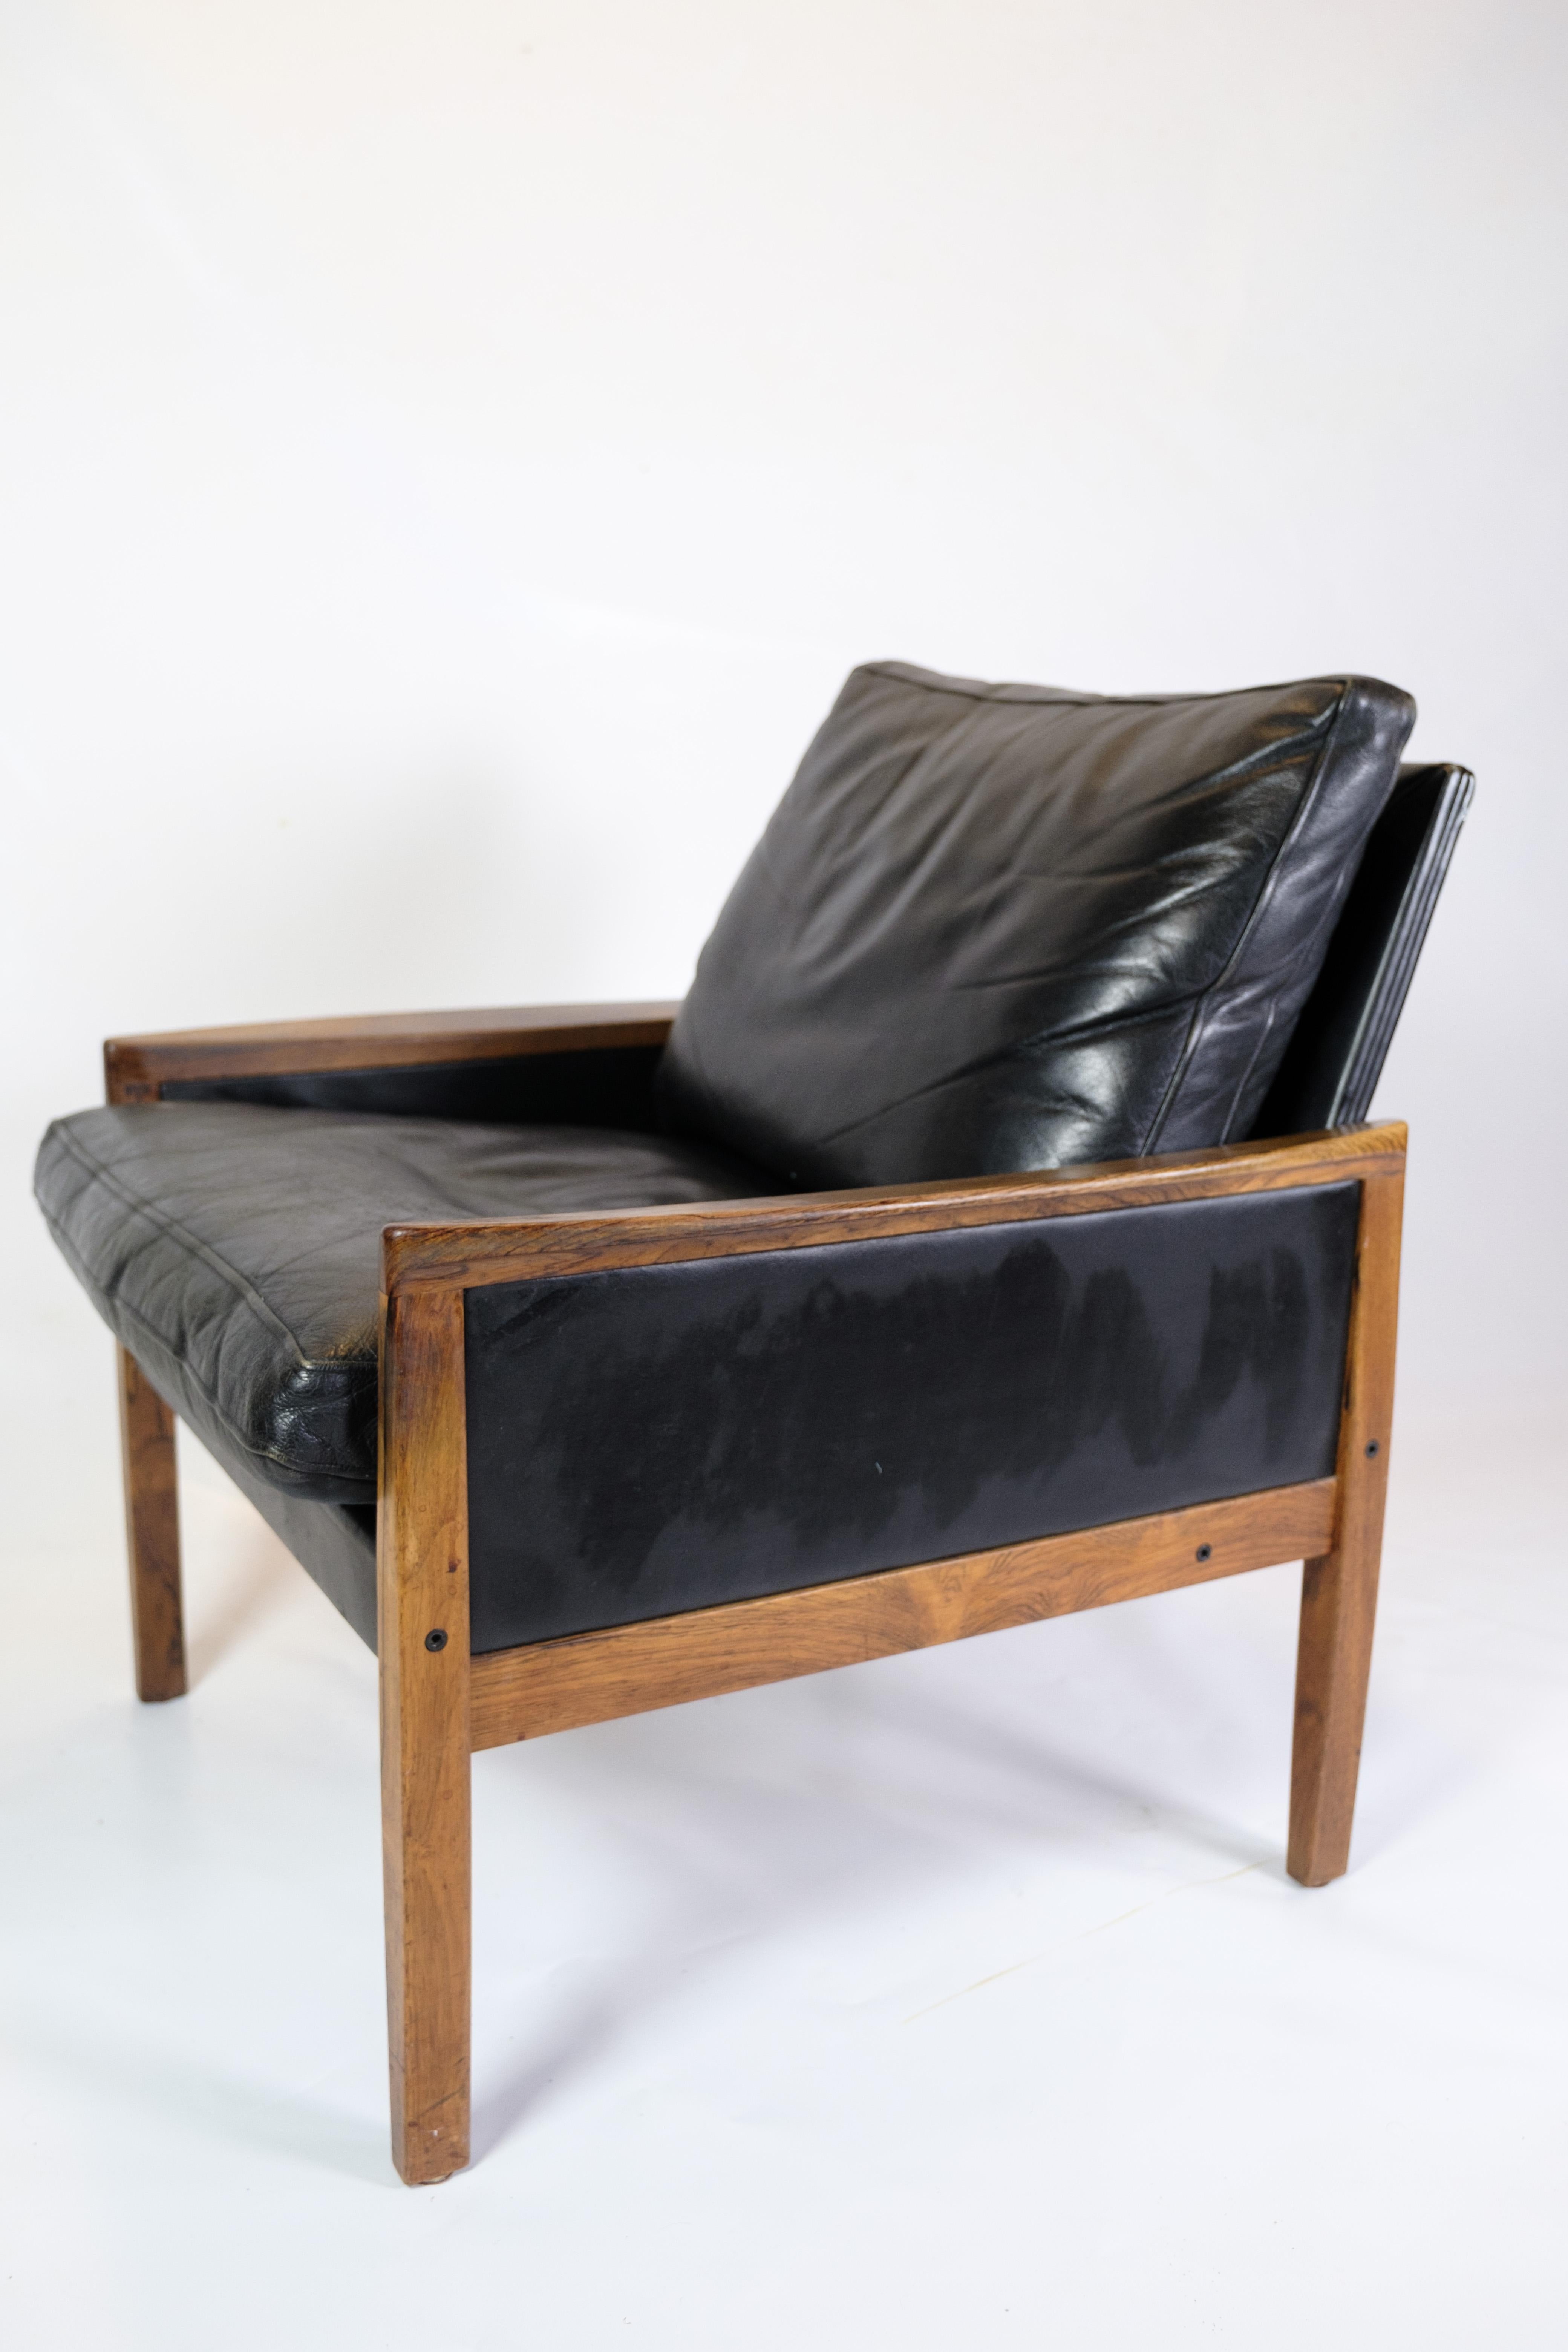 2 Armchairs Made In Rosewood By Hans Olsen Made By Brdr. Juul K. From 1960s 1